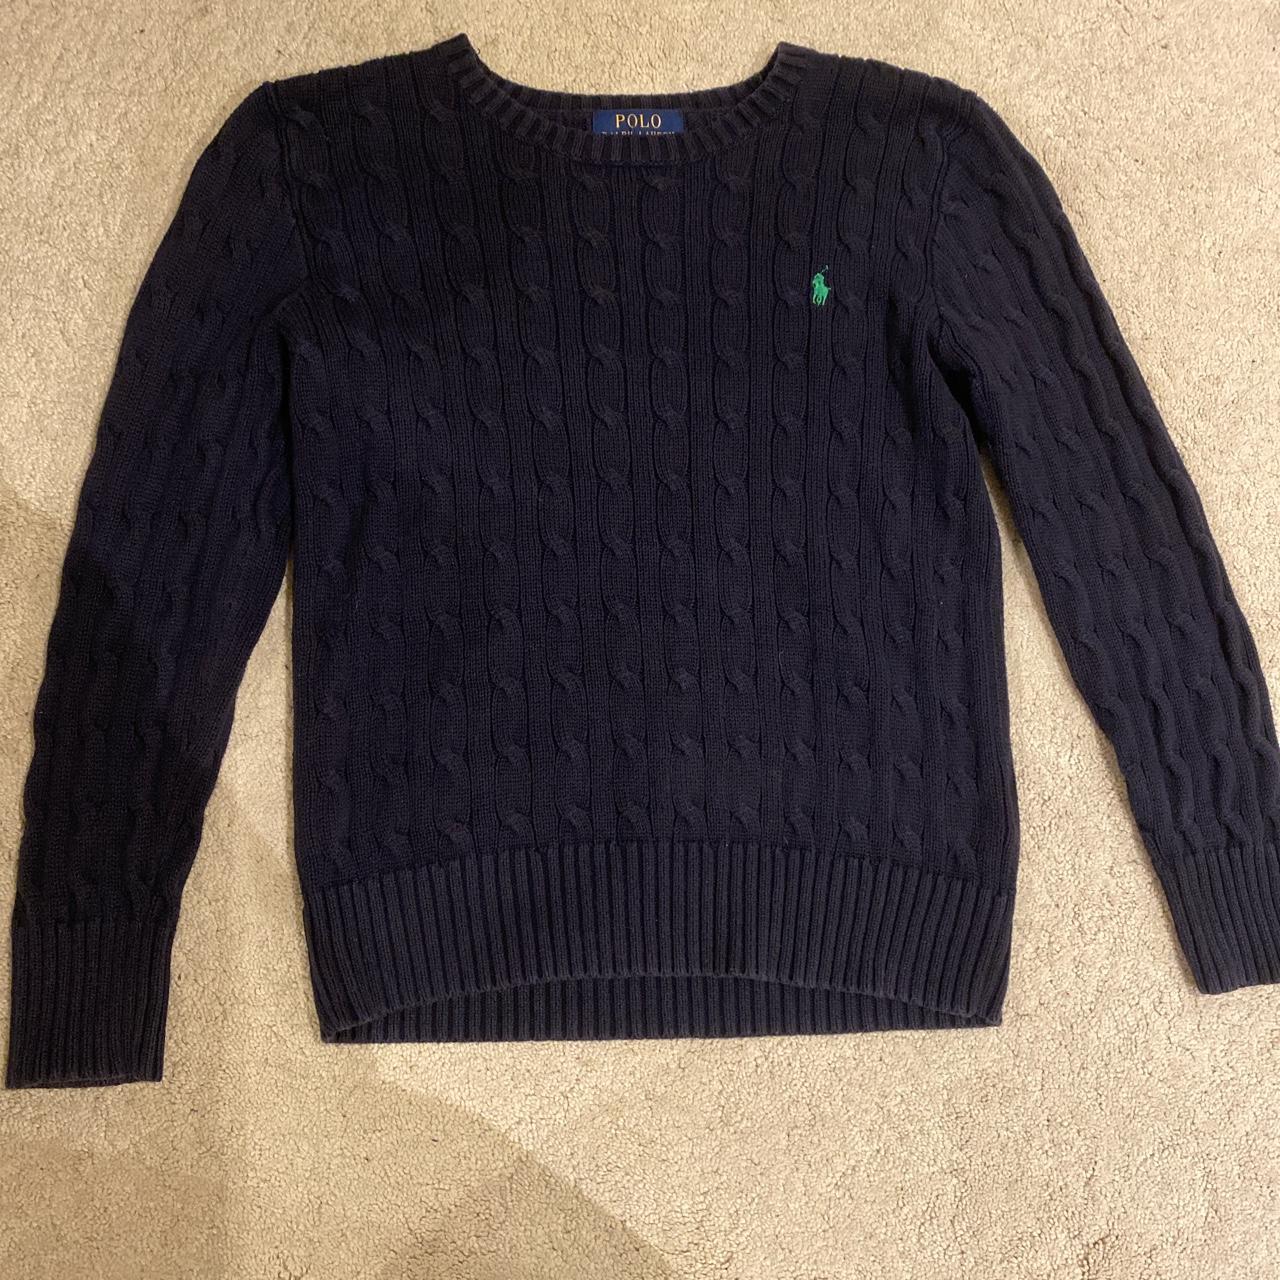 Polo Ralph Lauren cable knit jumper in navy Size M... - Depop